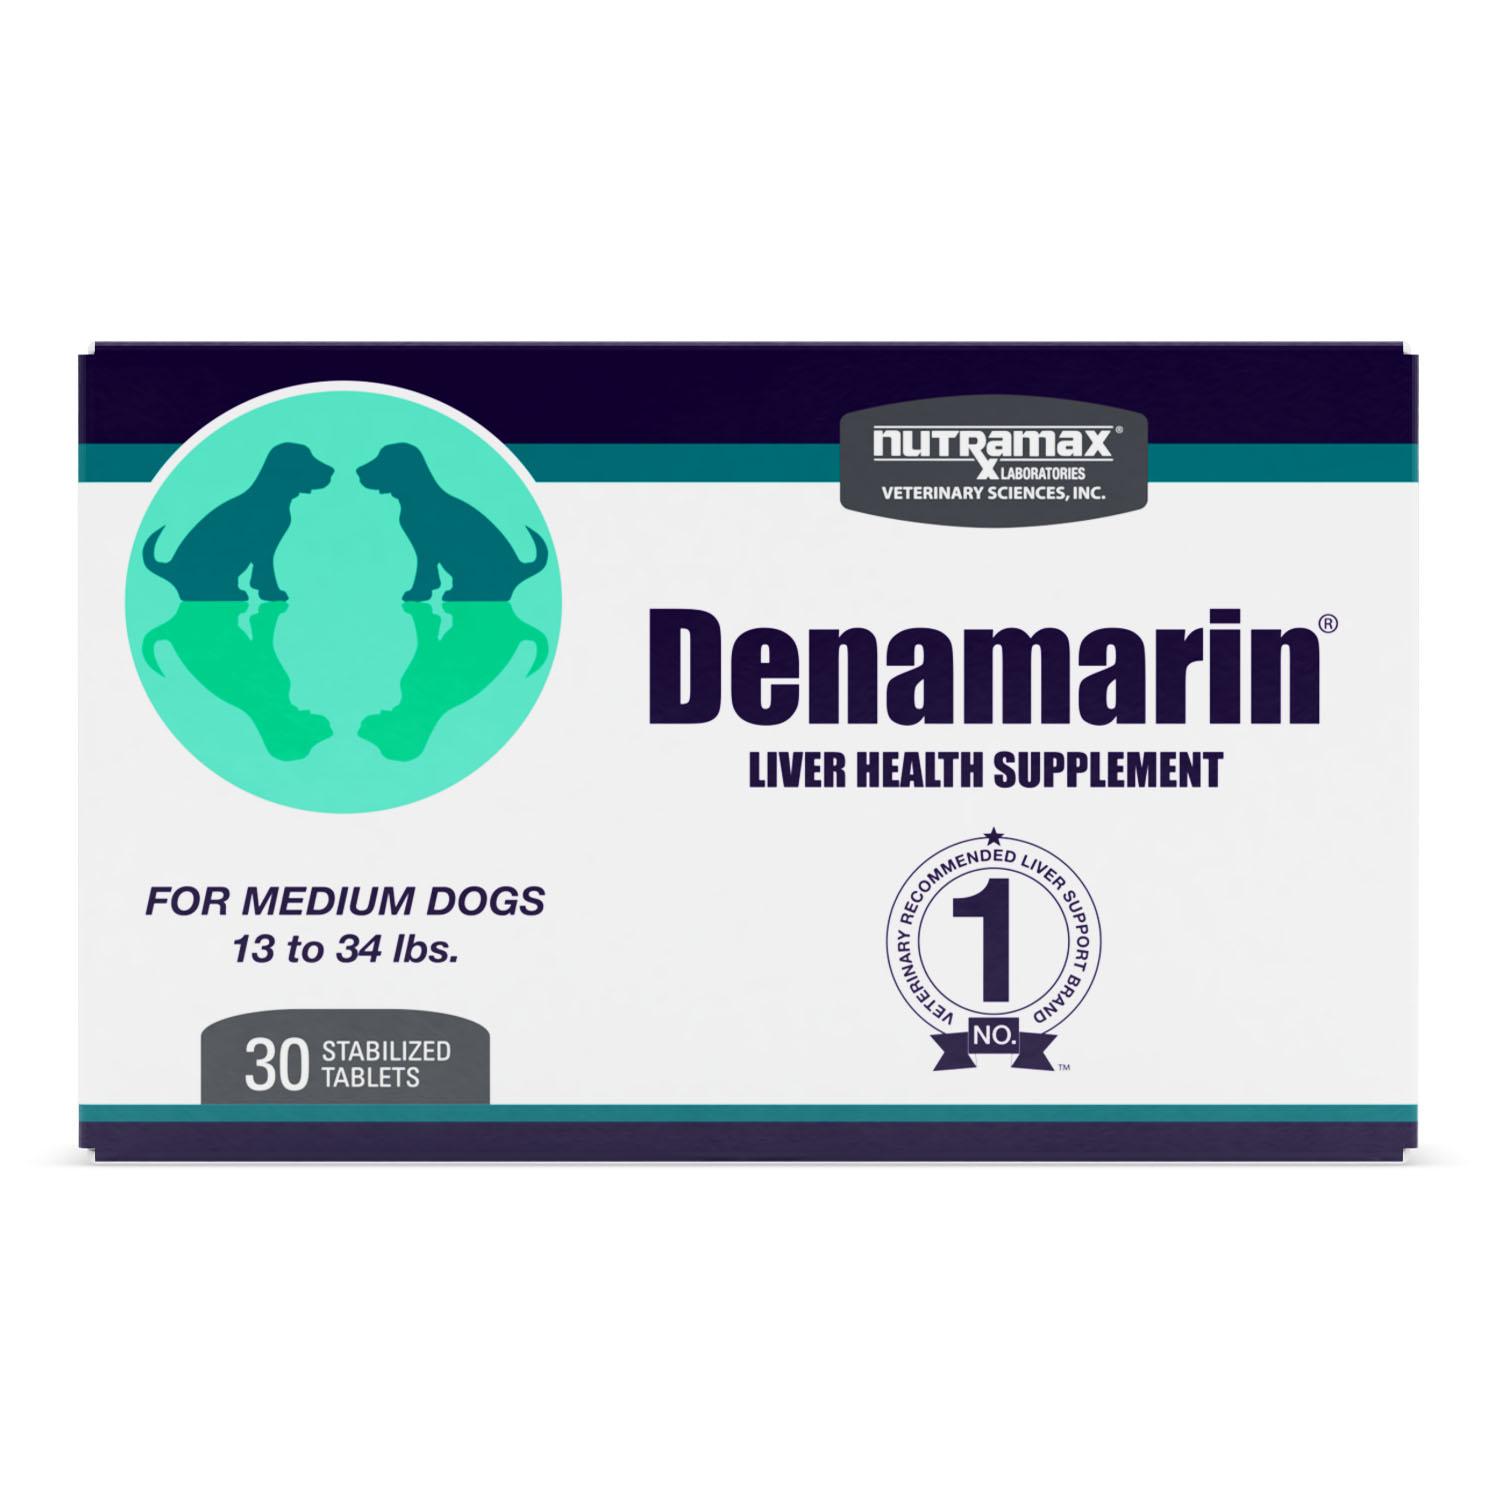 Denamarin®️ Liver Support Supplement for Medium Dogs by Nutramax®️